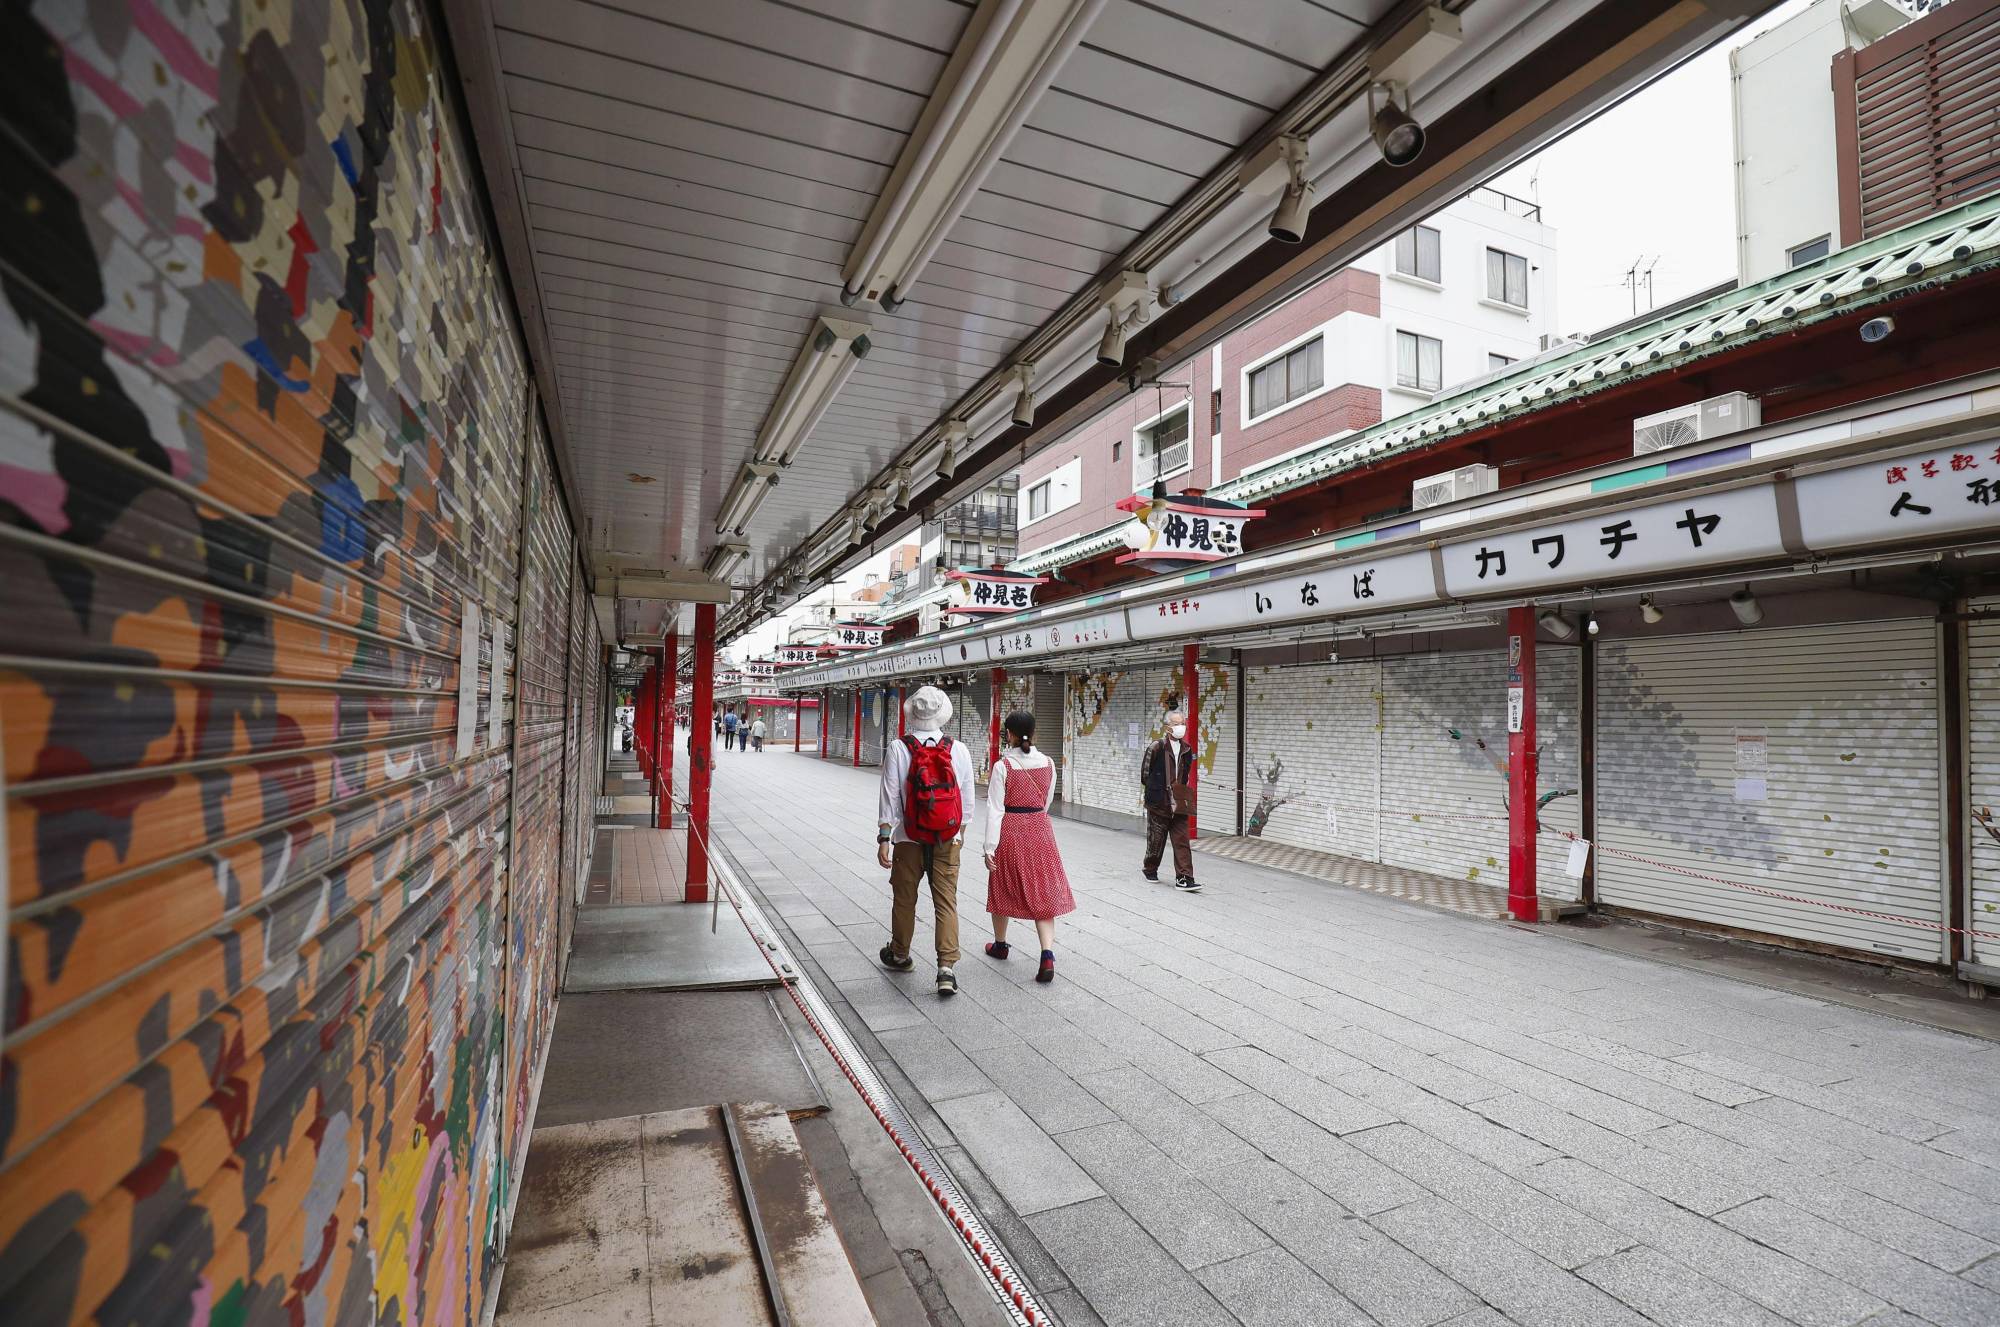 People walk past shuttered stores in Tokyo's Asakusa tourist area on Saturday amid an extended nationwide state of emergency over the coronavirus pandemic. | KYODO